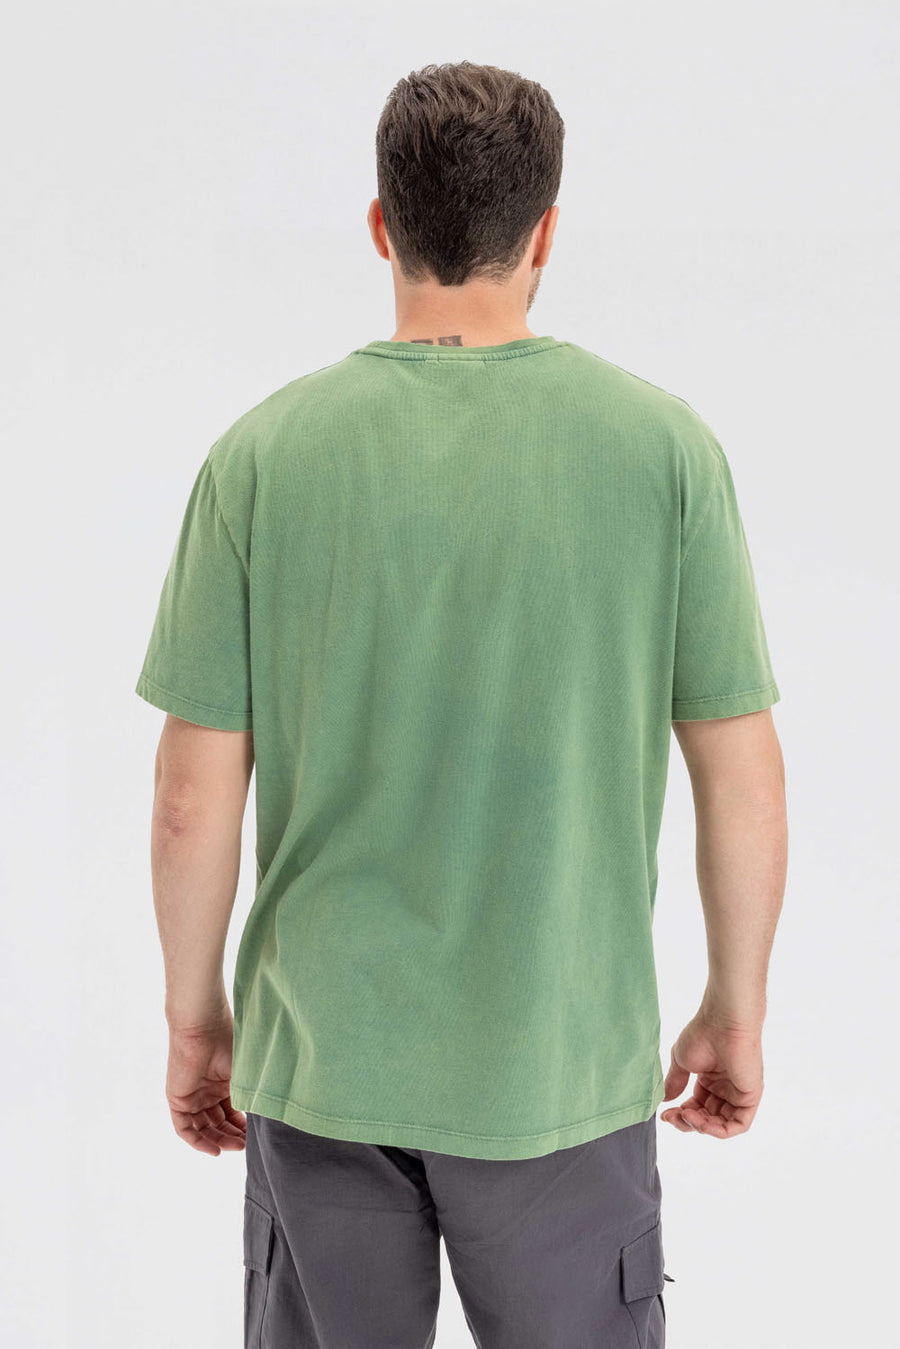 GNP Acid Washed Cut And Sew Green T-Shirt 